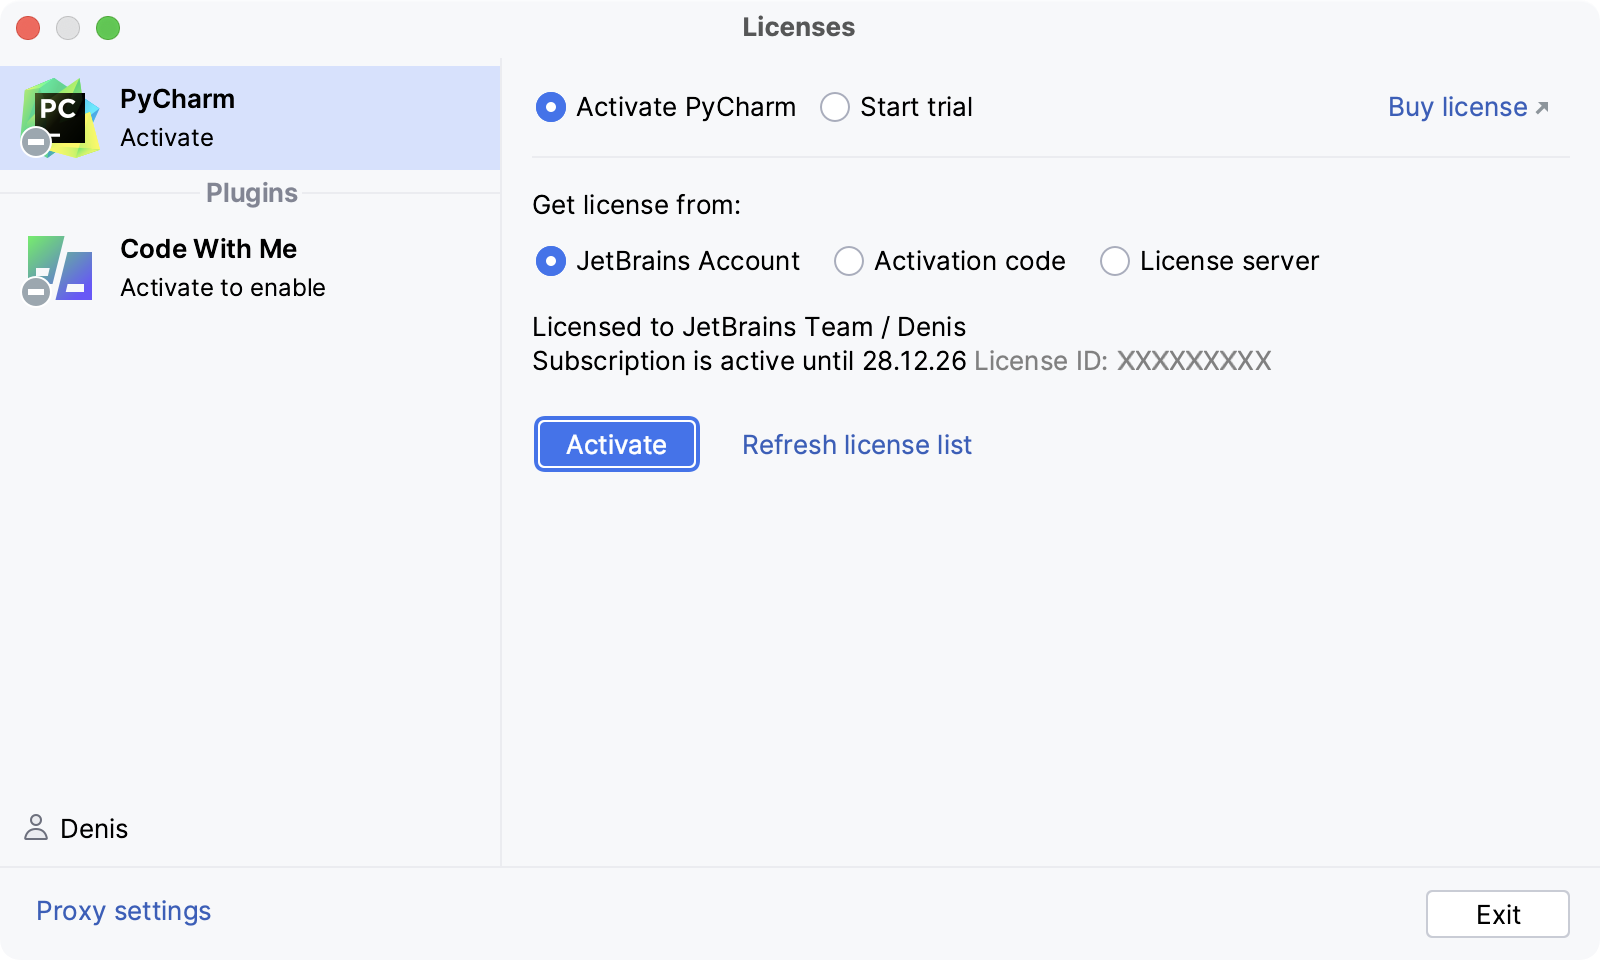 Activate PyCharm license with a JetBrains Account